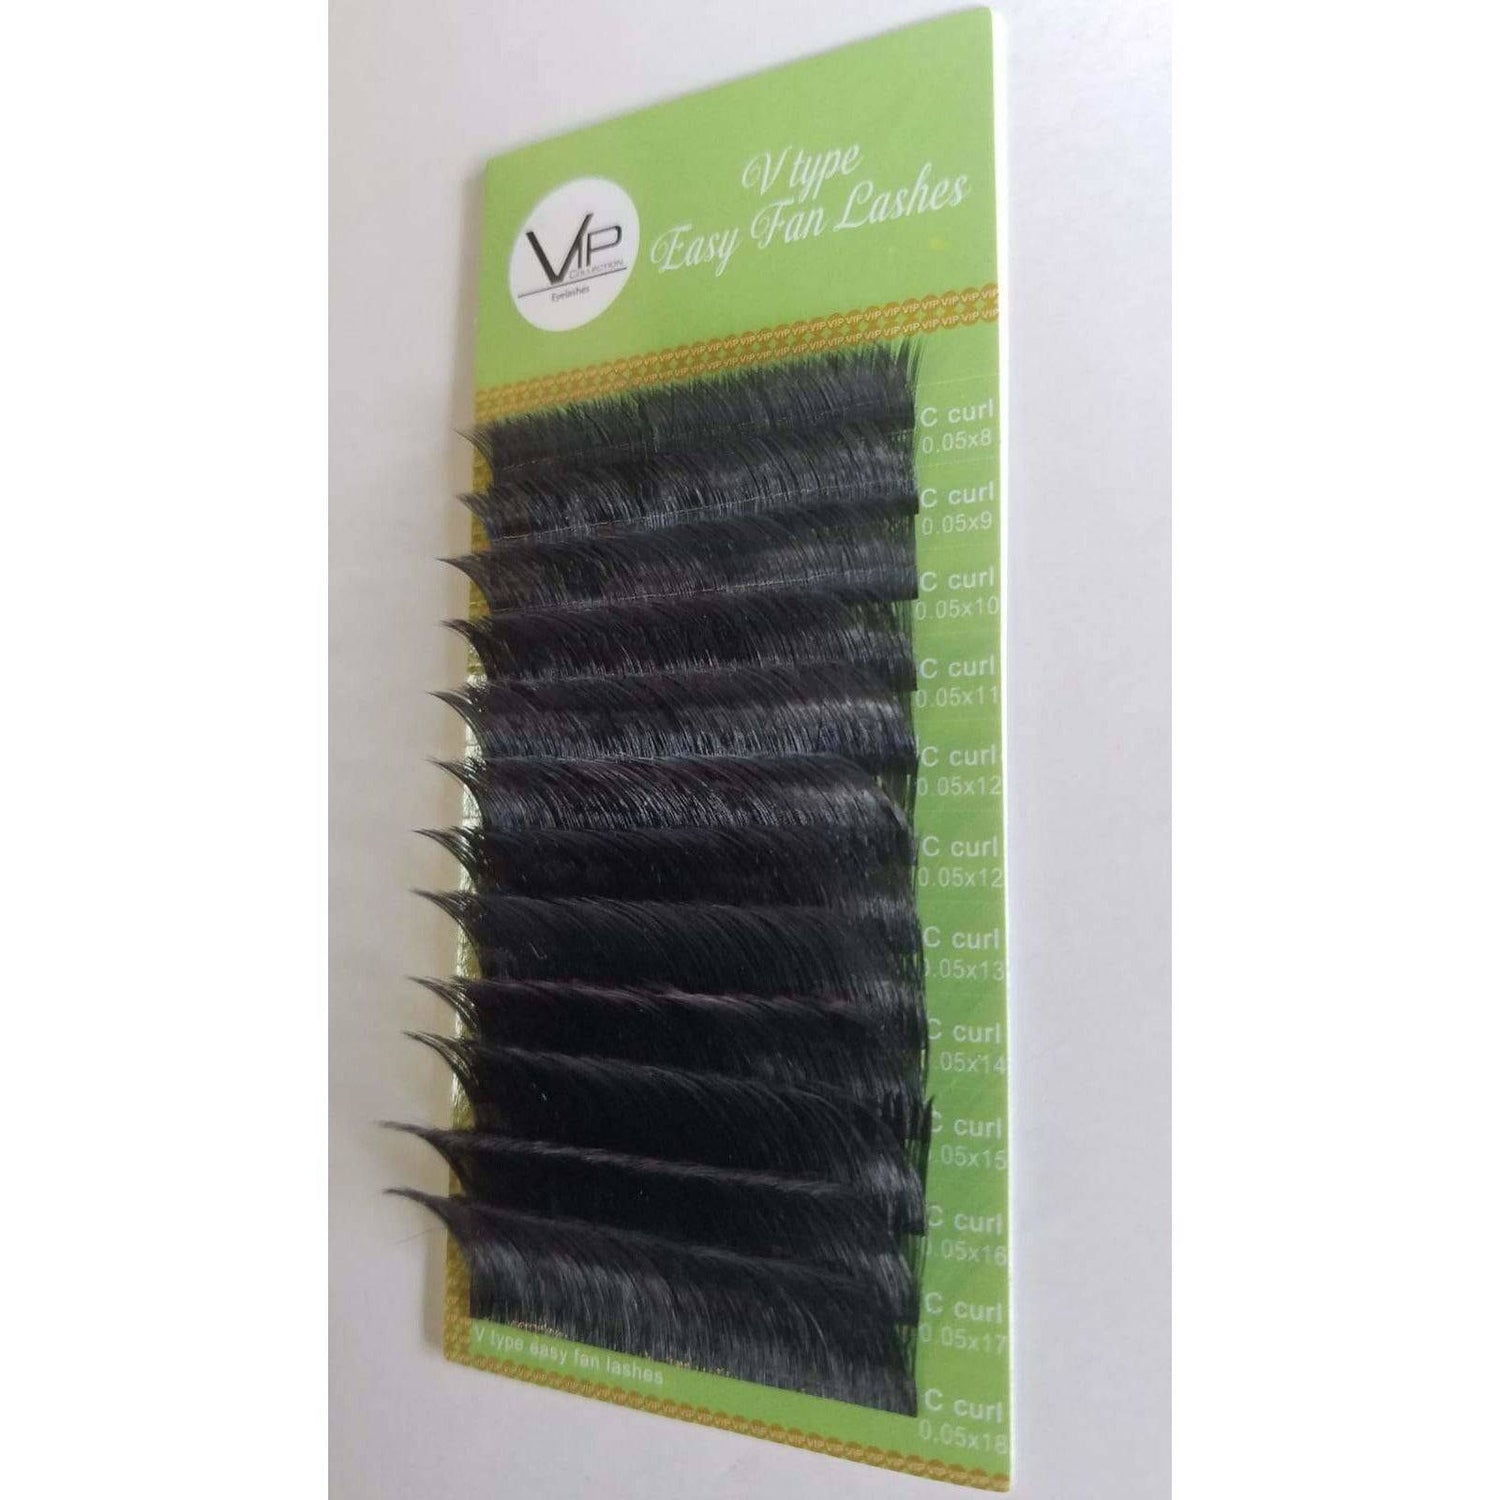 VIP -  V Type Easy Fan Lashes - 0.5 C curl -12 lines - VIP Extensions